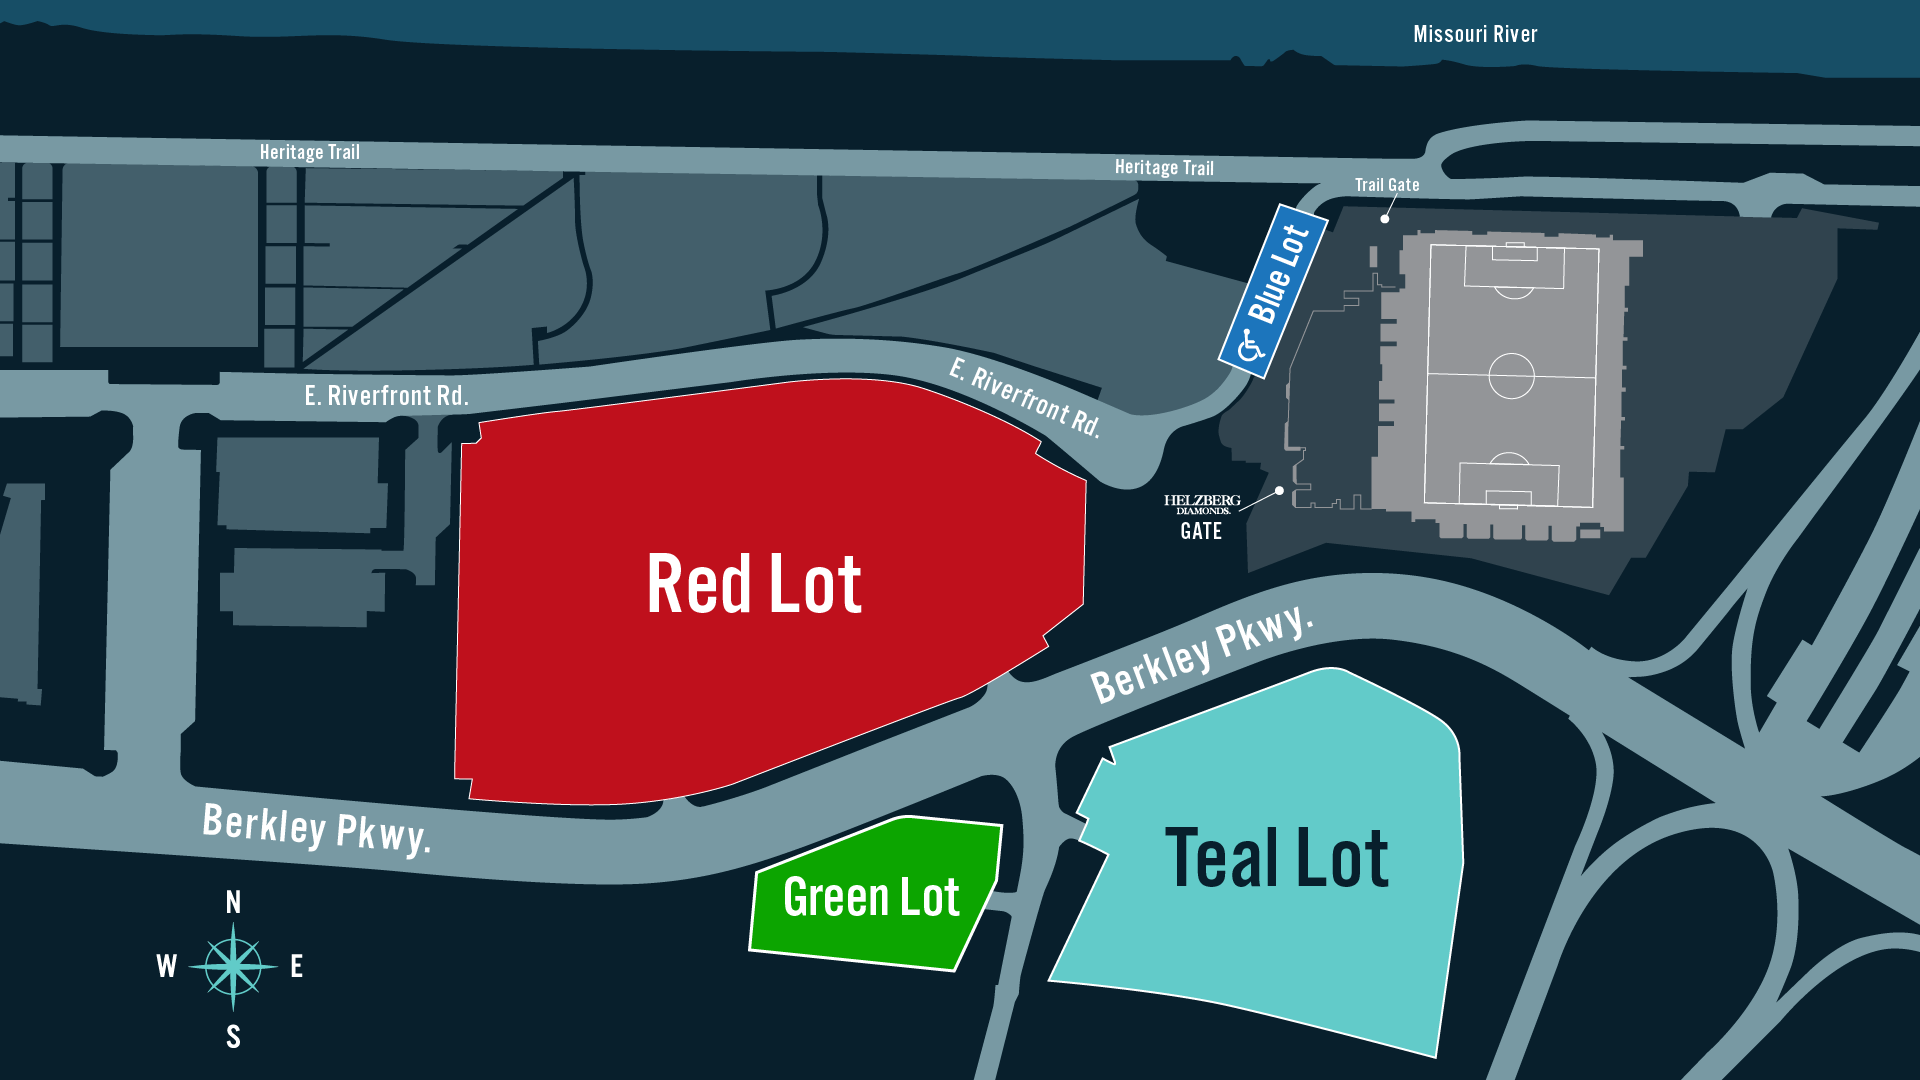 Red Lot at CPKC Stadium is where fans can park for the Watch Party.